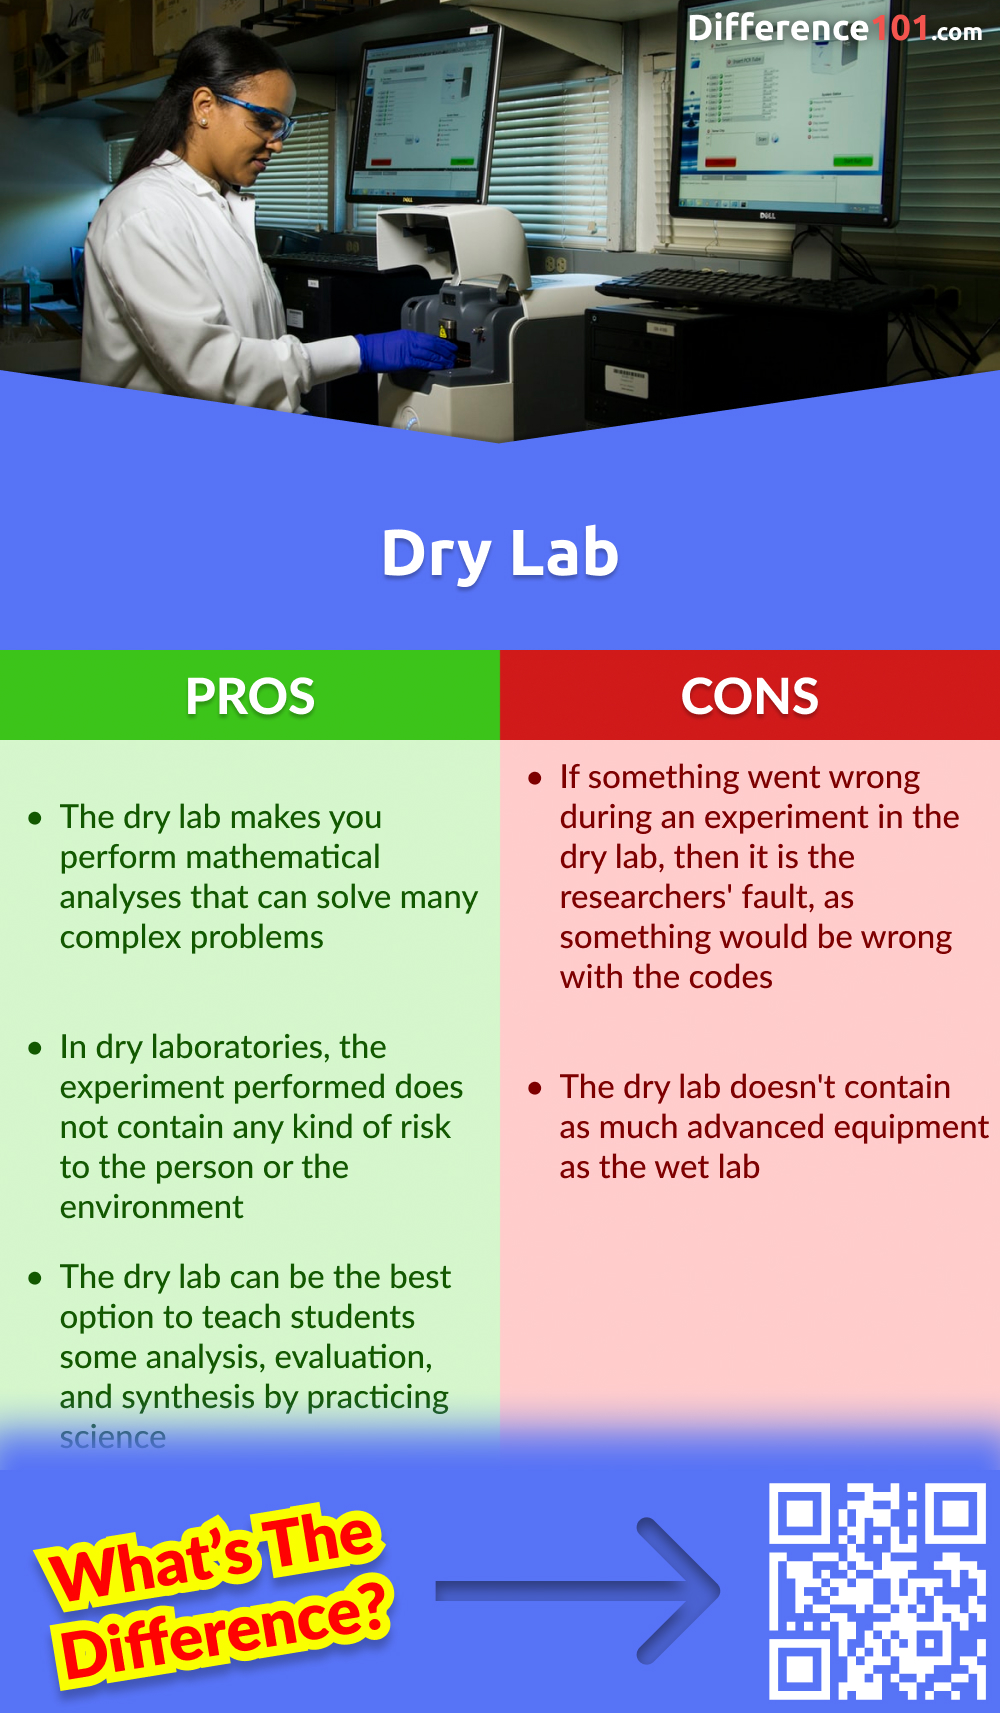 Dry Lab Pros and Cons